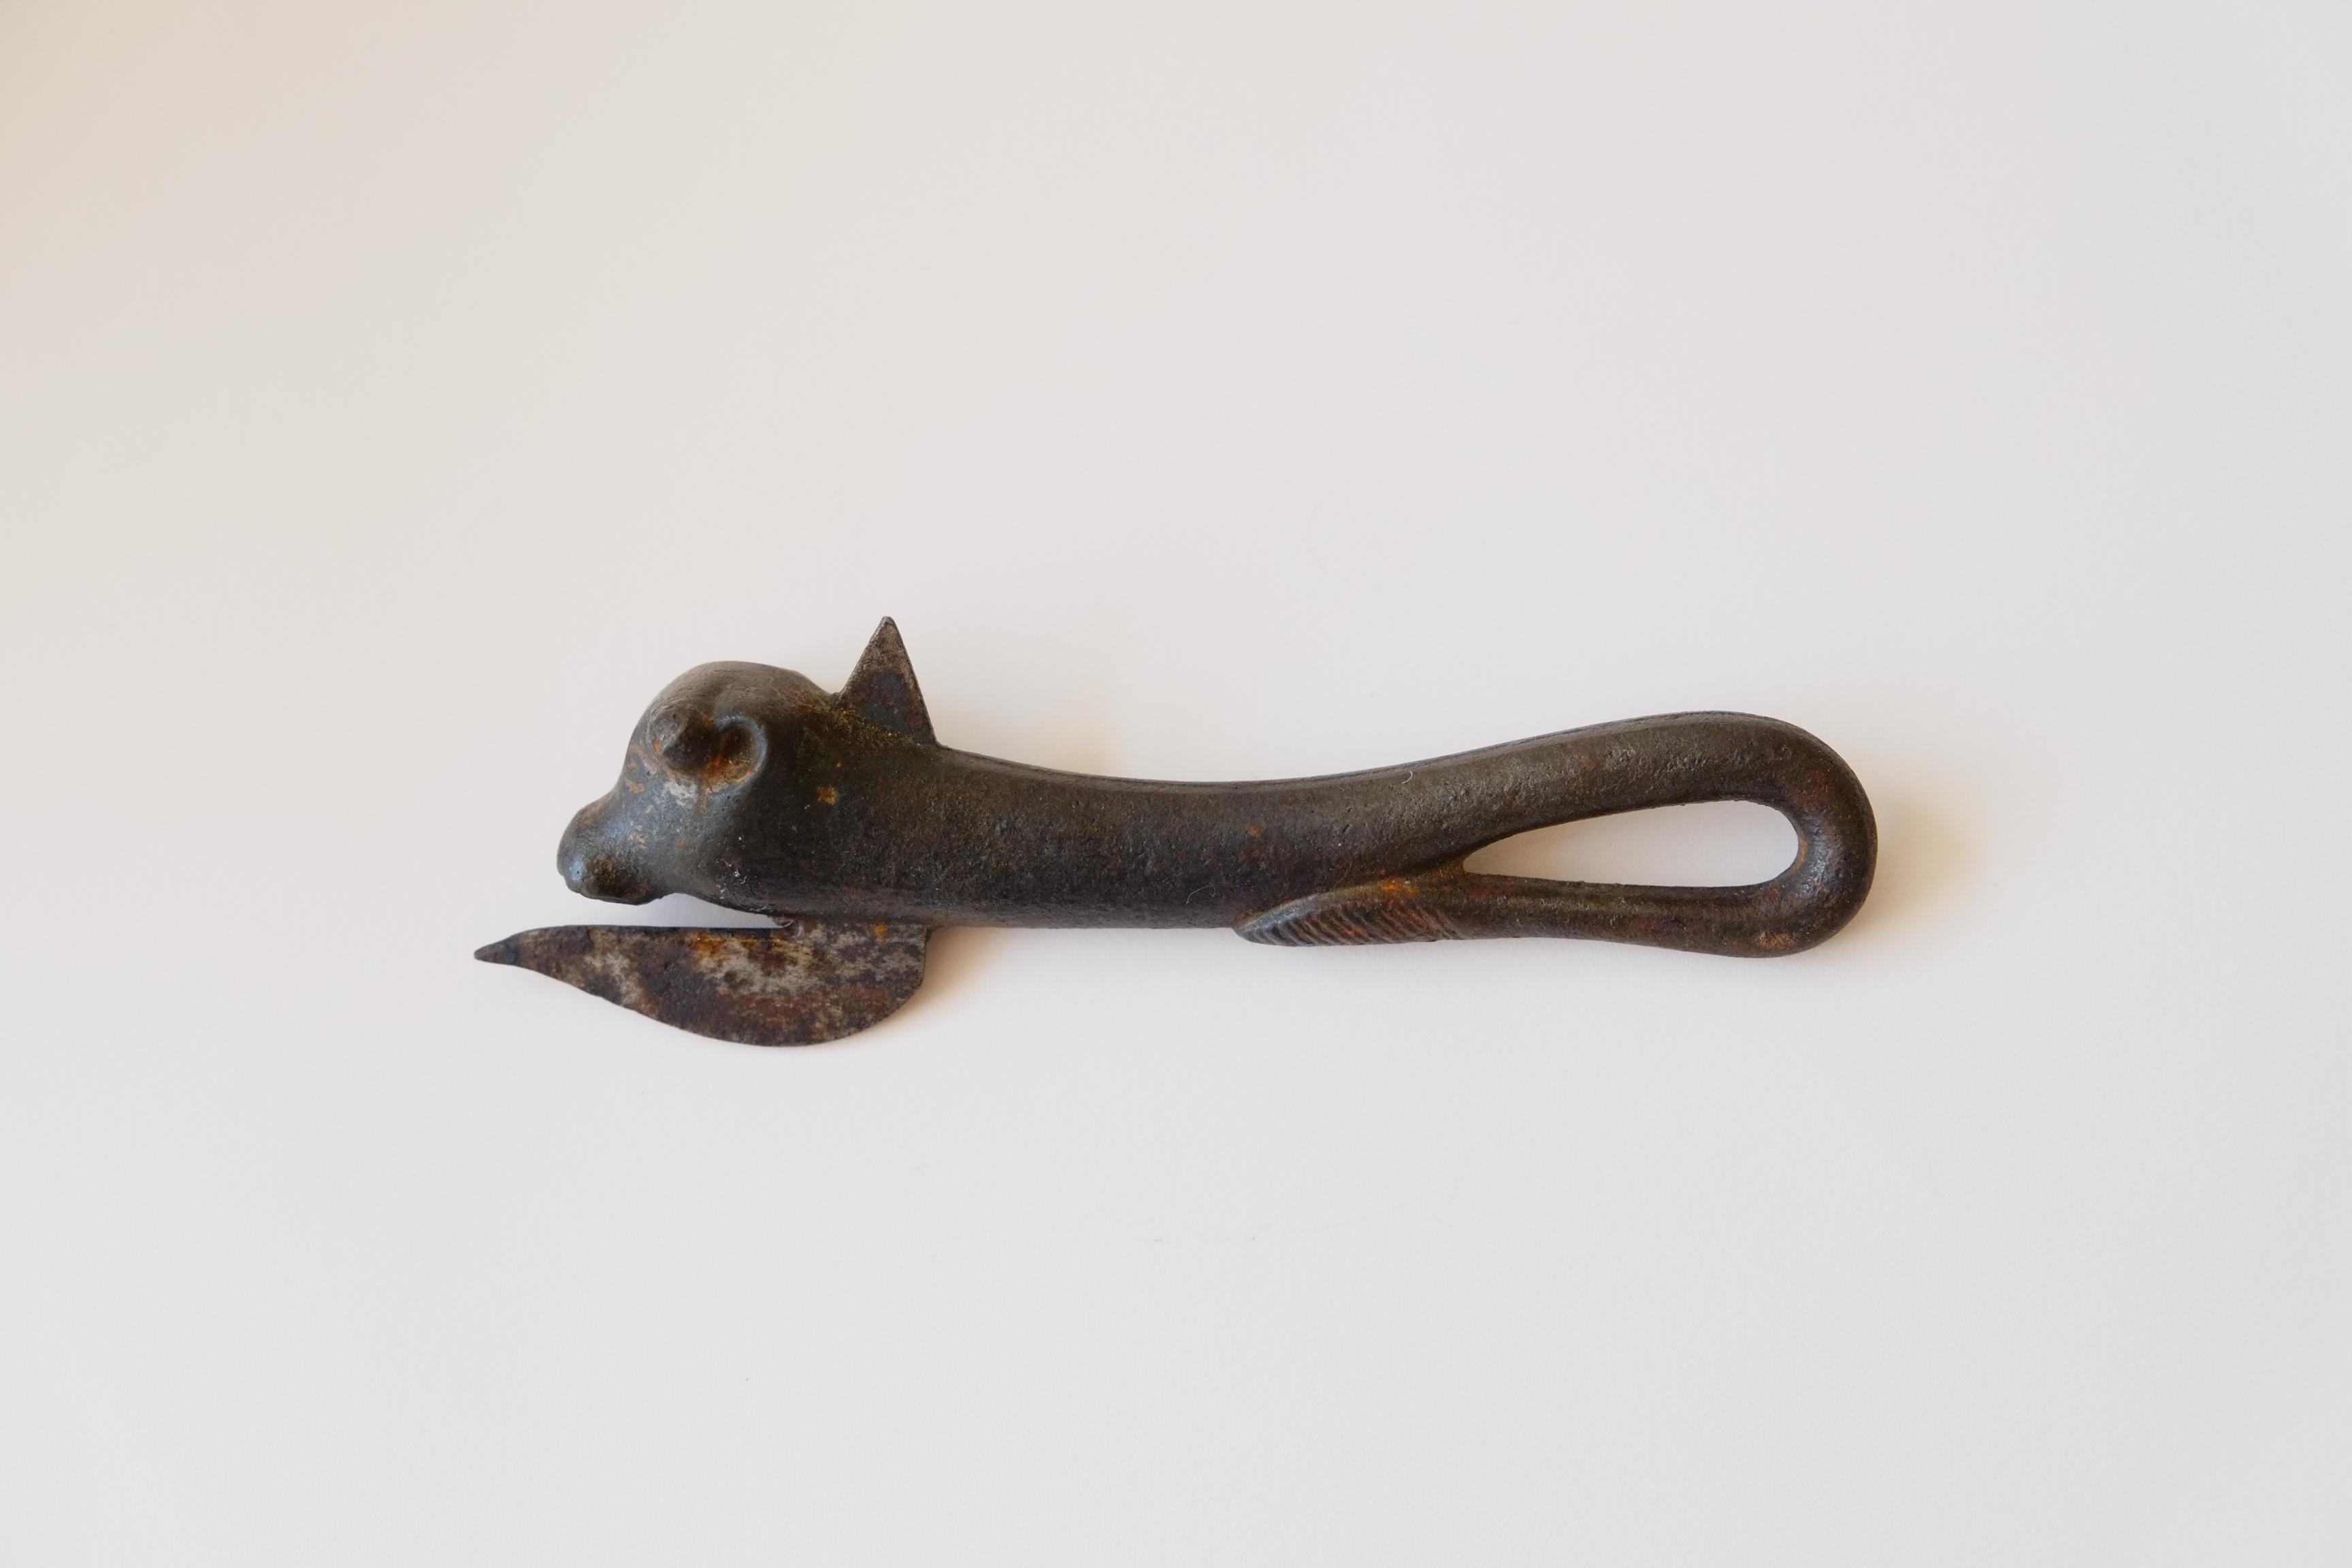 A beautiful cast iron antique bottle or can opener in the form of a bull. From the early 20th century - the stylish abstract bull figure makes for a timeless novelty piece. The perfect addition to any bar. 

measures approximately 16 cm high x 5 cm